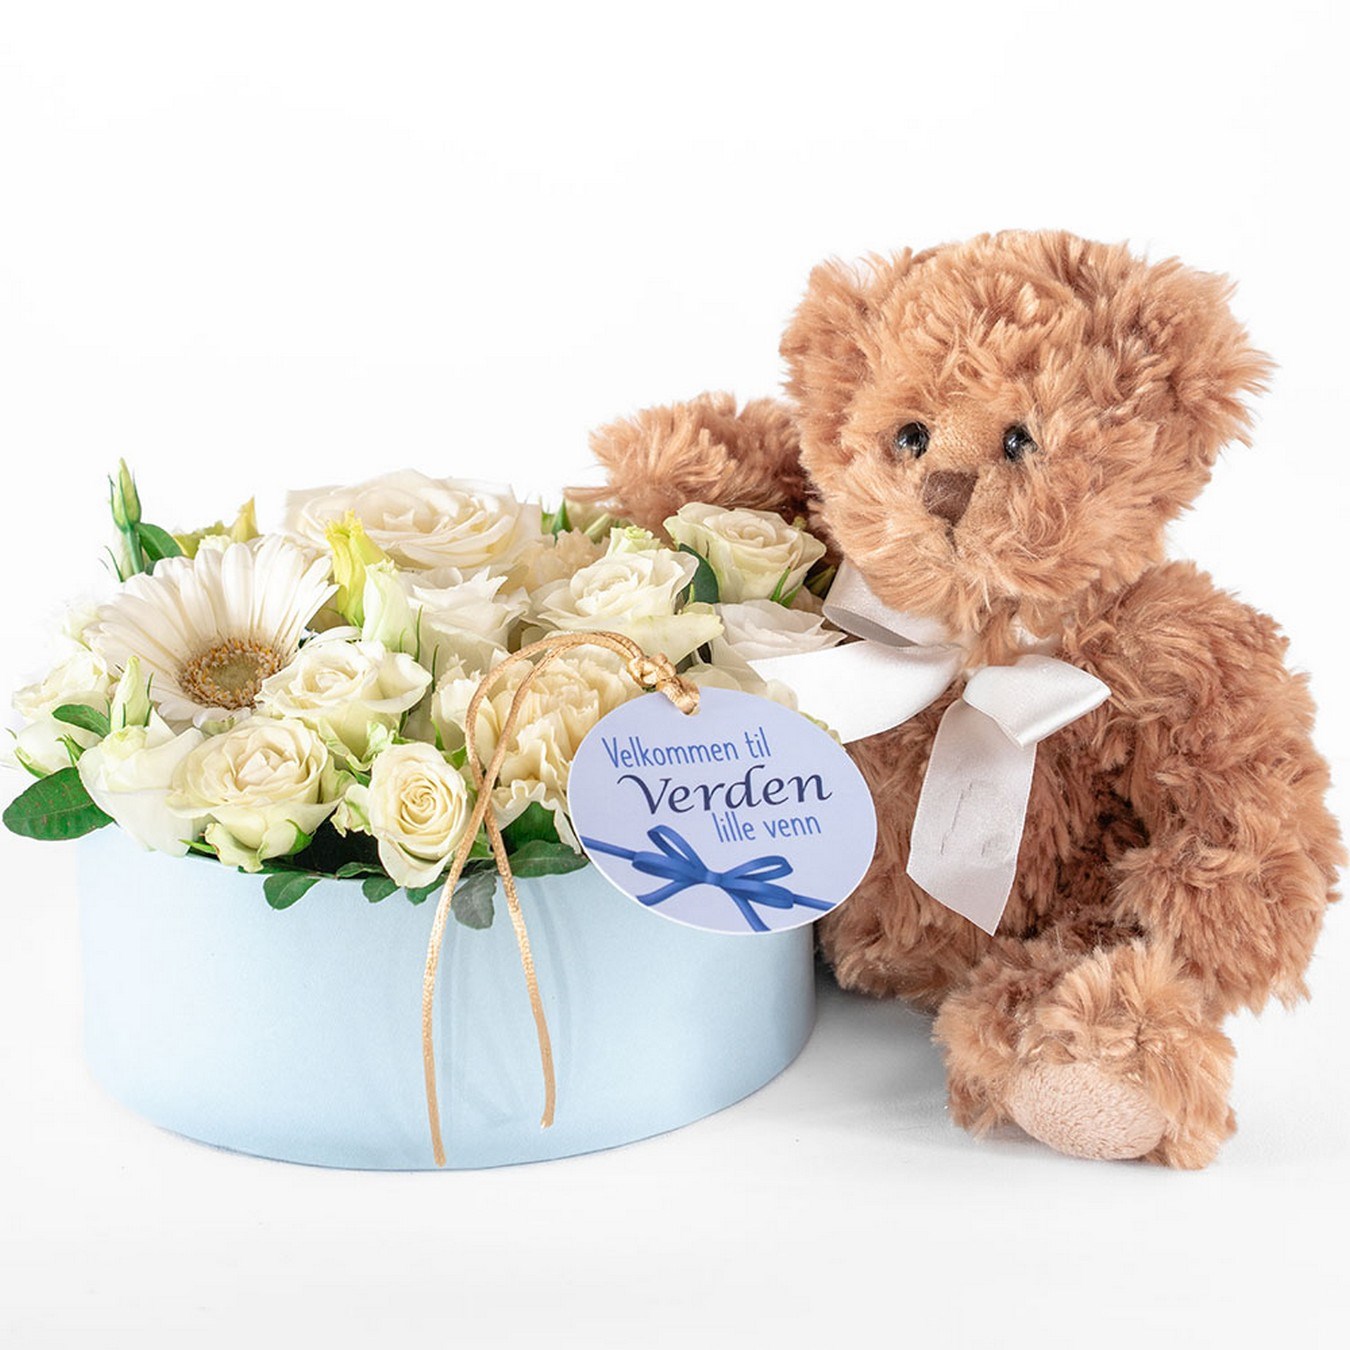 product image for Prince and Teddy 220462